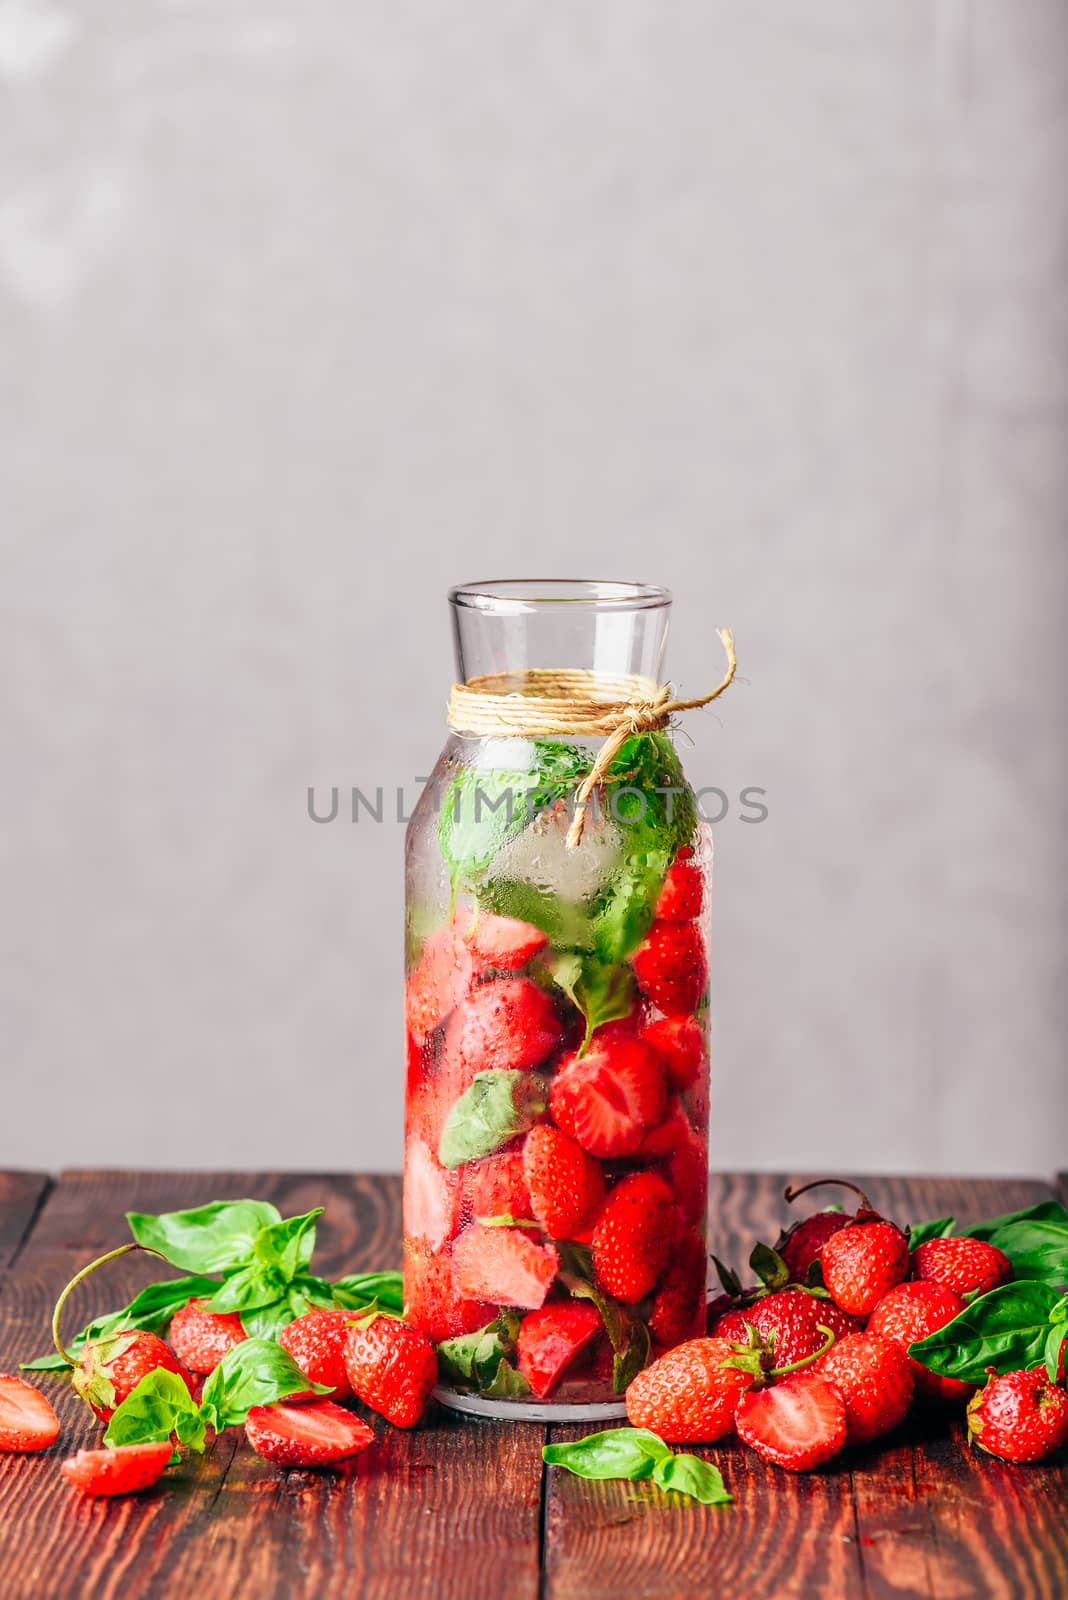 Bottle of Water Infused with Fresh Strawberry and Basil Leaves. Scattered Ingredients on Wooden Table. Vertical Orientation and Copy Space.